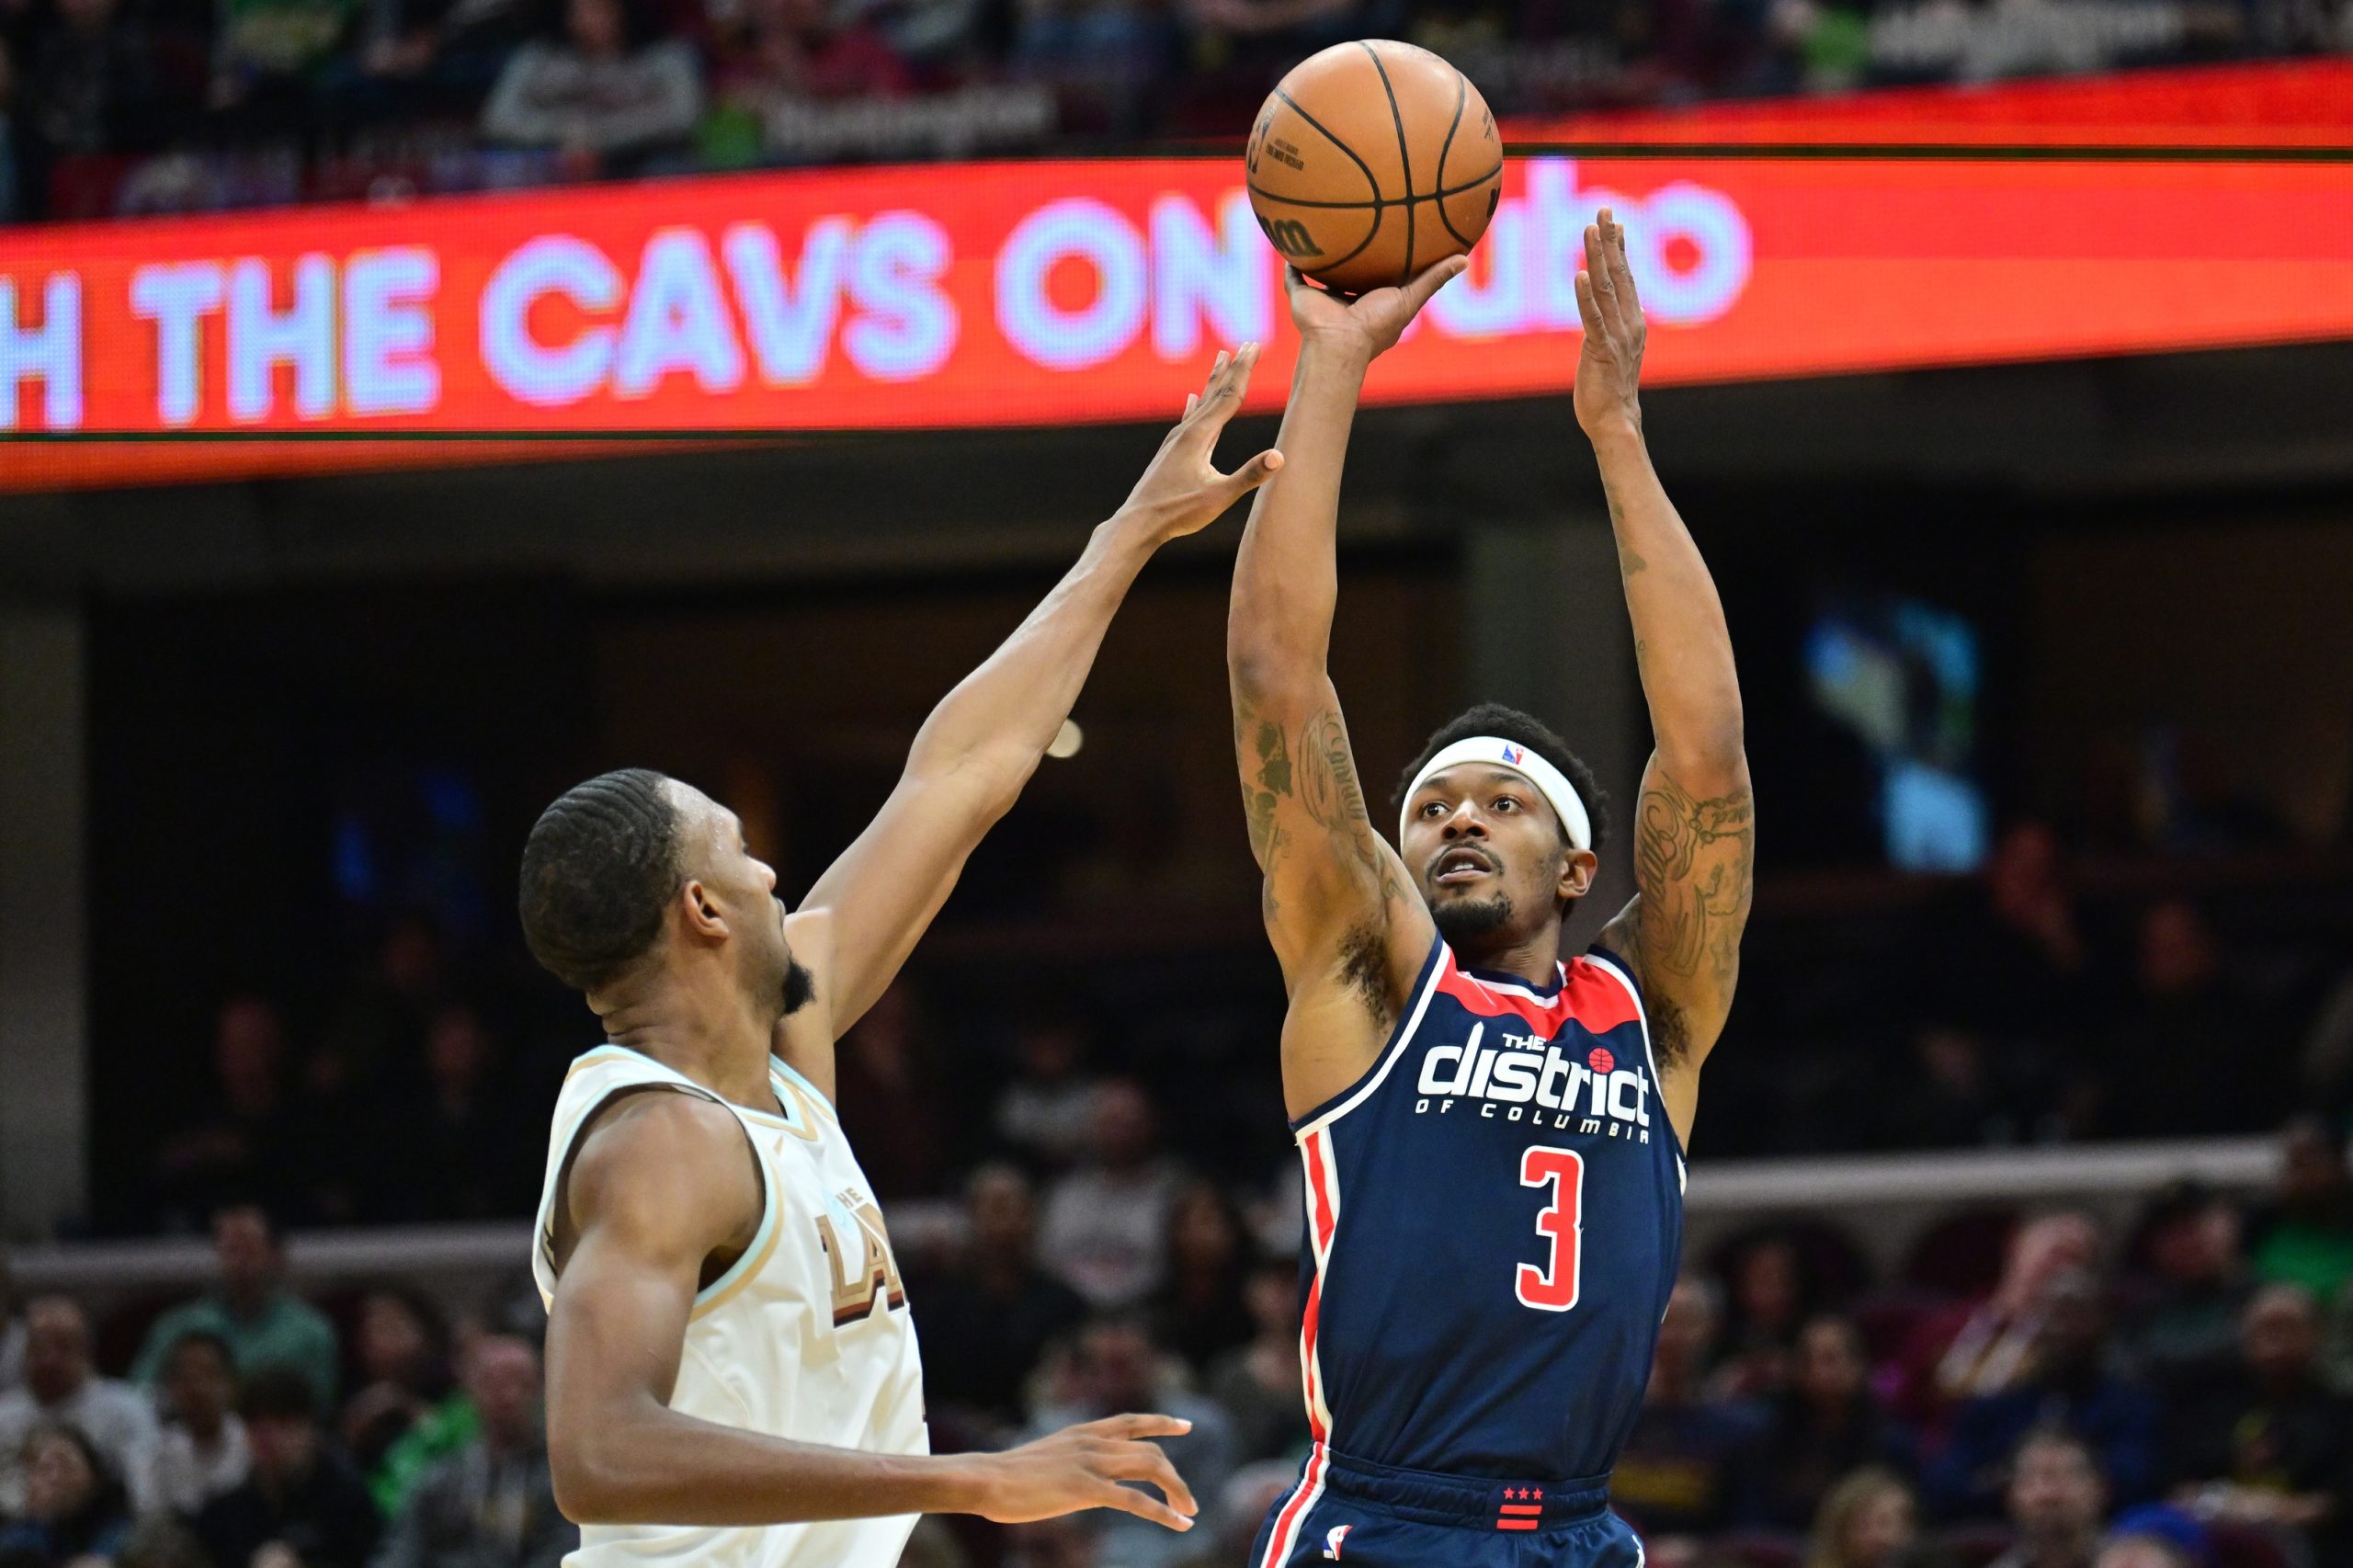 Mar 17, 2023; Cleveland, Ohio, USA; Washington Wizards guard Bradley Beal (3) shoots over the defense of Cleveland Cavaliers forward Evan Mobley (4) during the second half at Rocket Mortgage FieldHouse. Mandatory Credit: Ken Blaze-USA TODAY Sports